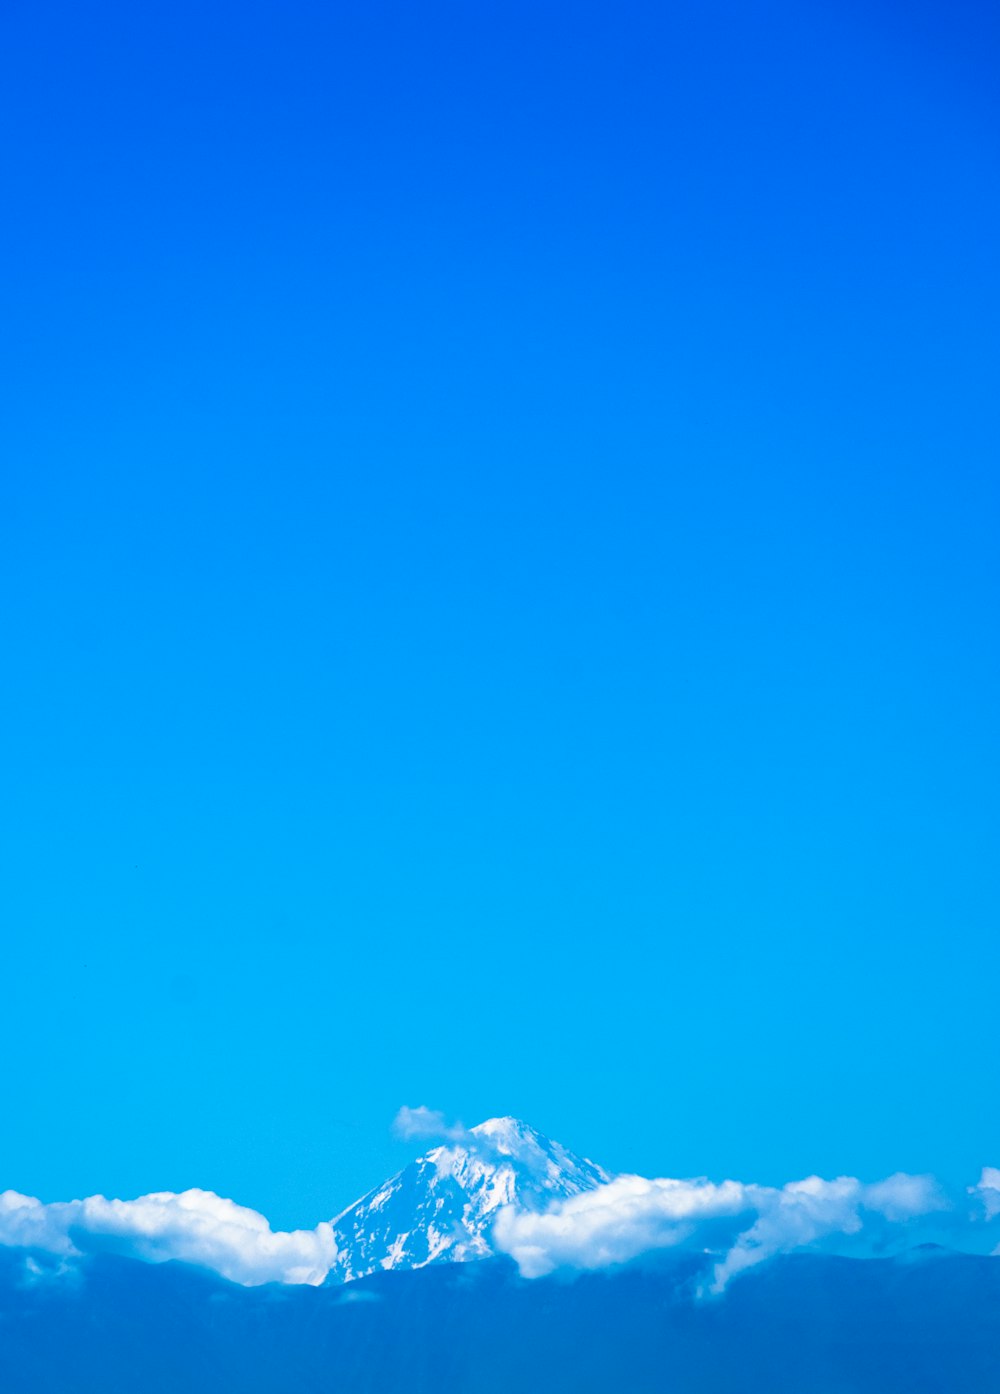 snow covered mountain under blue sky during daytime